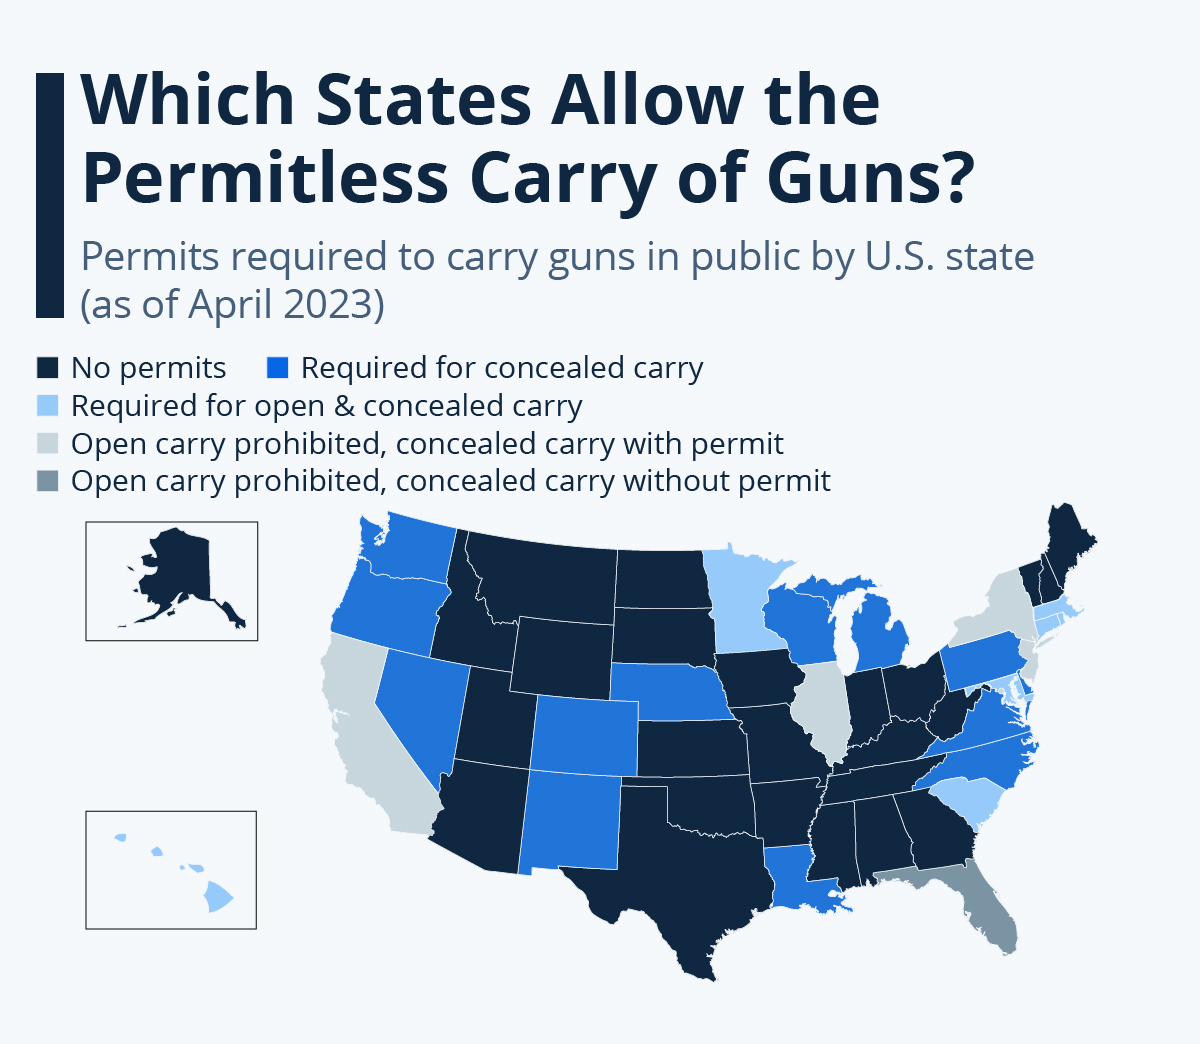 Blog # 240 - Which States Have the Best Gun Rights?